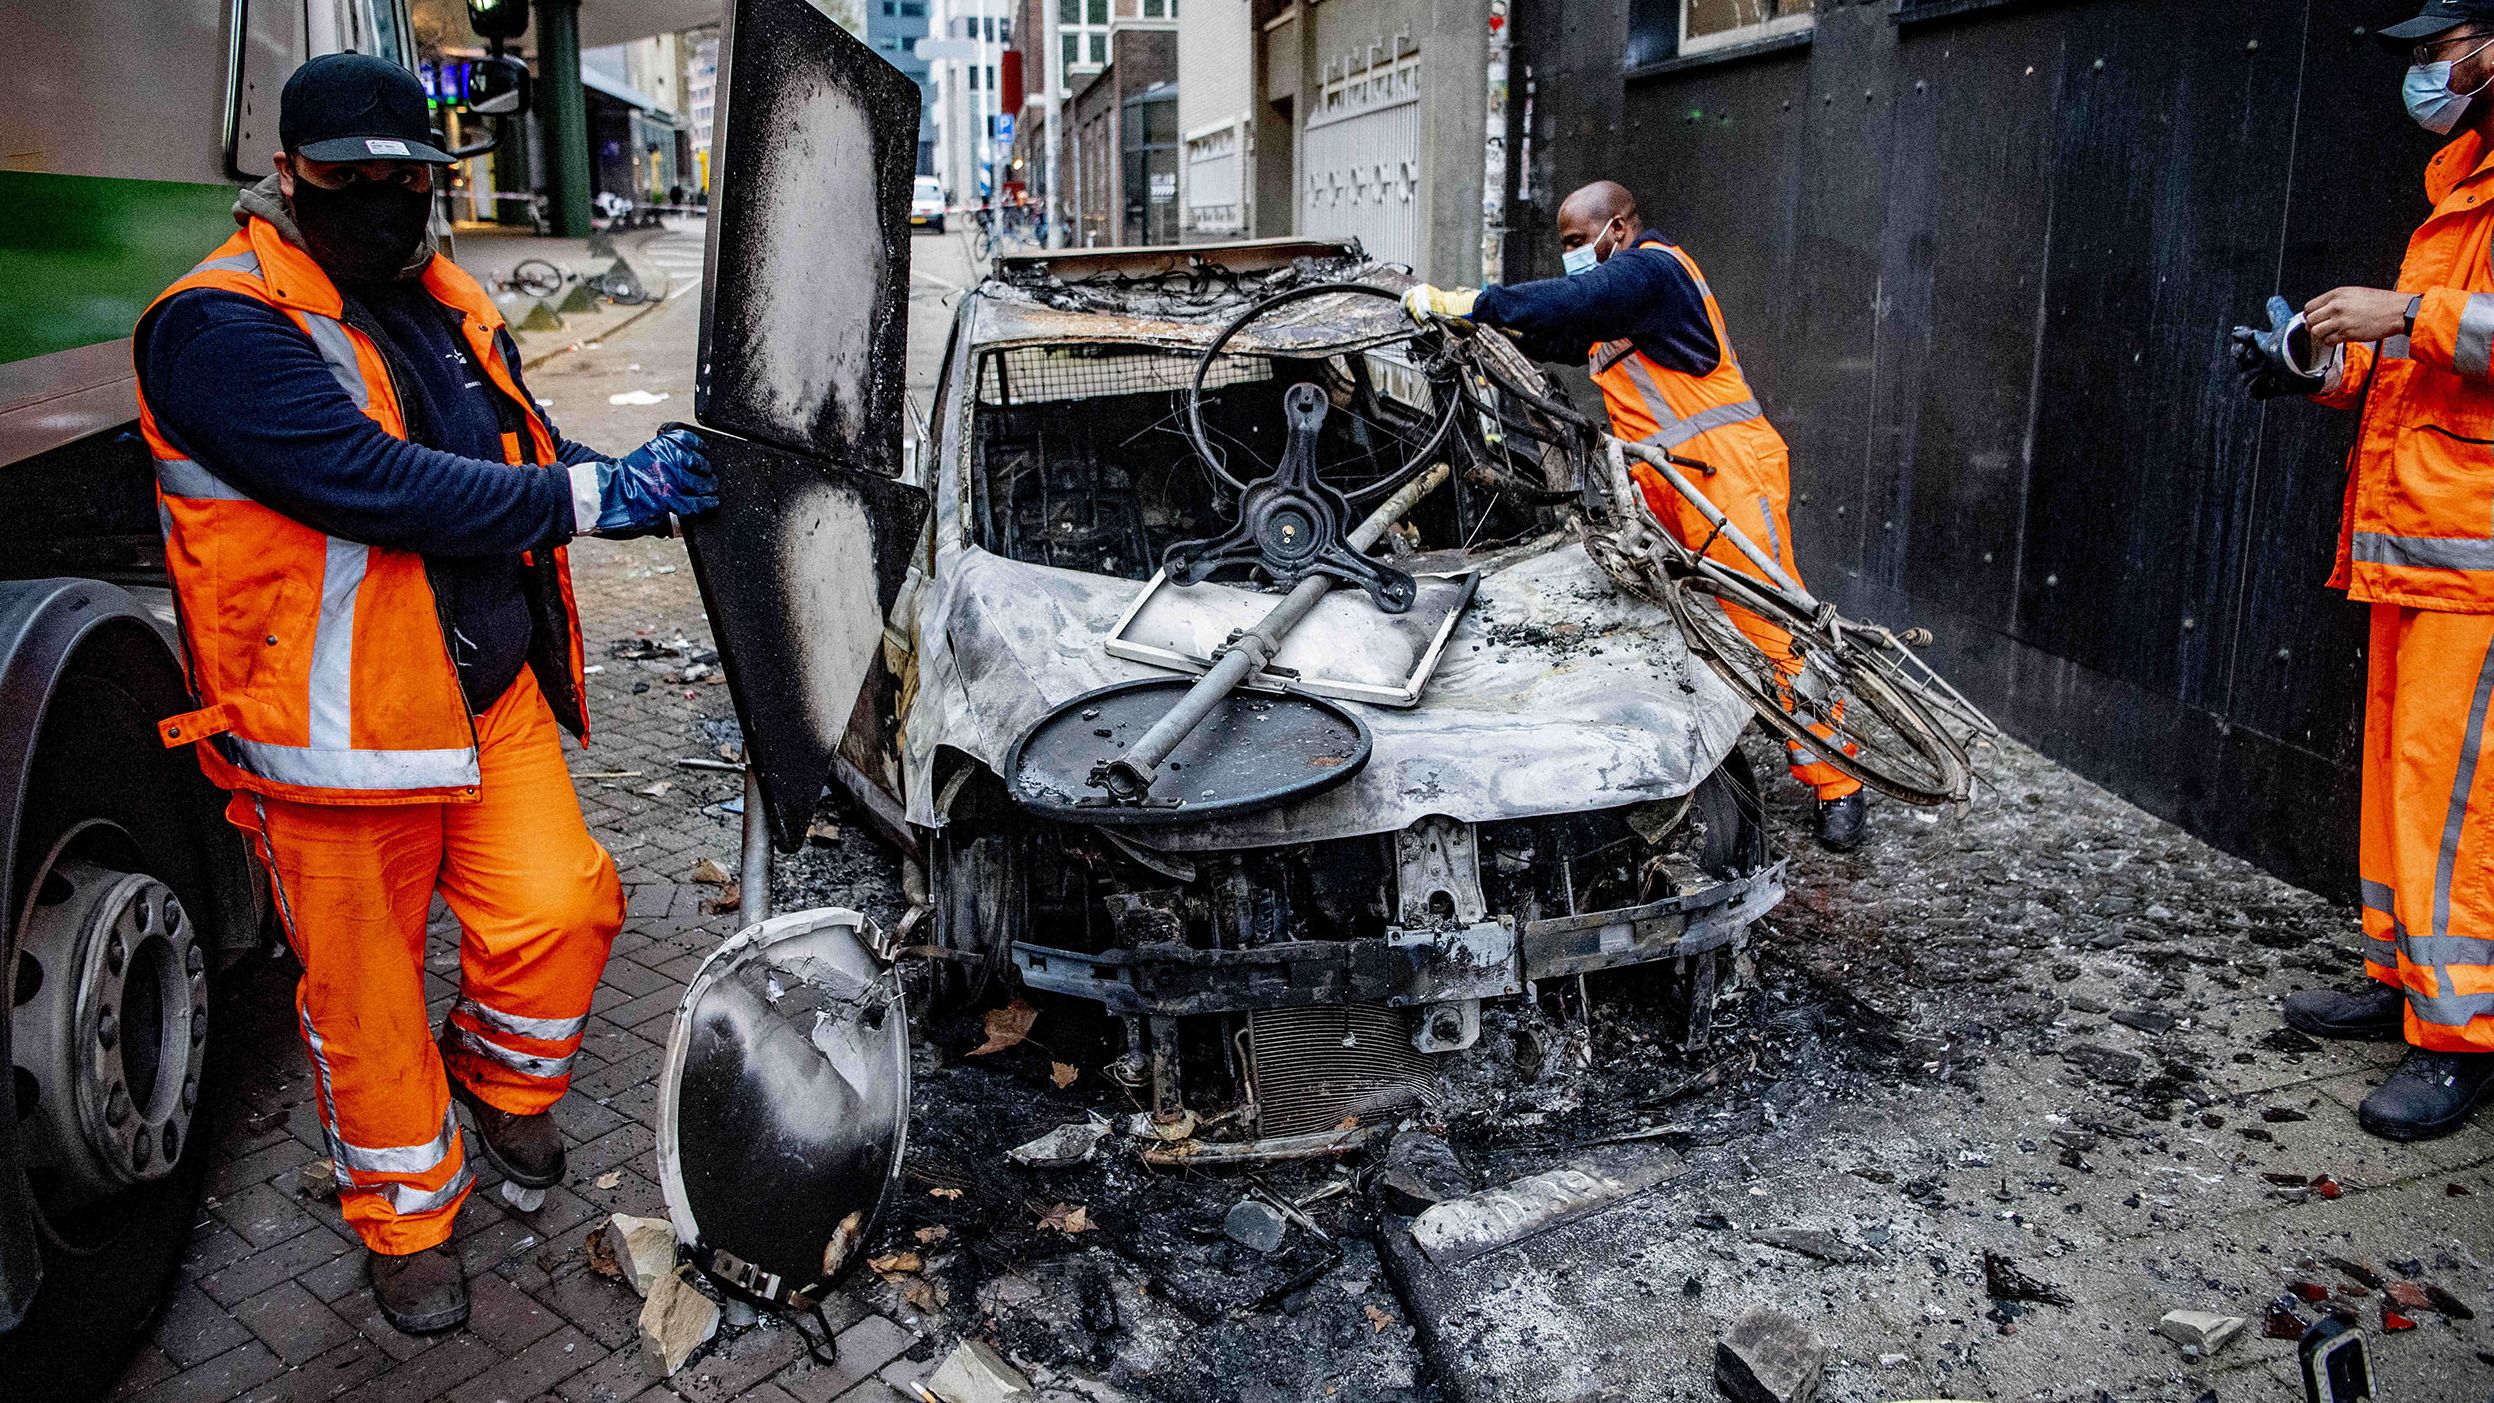 Workers clear debris from a damaged car in Rotterdam, Netherlands, on Saturday, November 20. There were violent clashes the night before as people protested against the country's new Covid-19 restrictions.